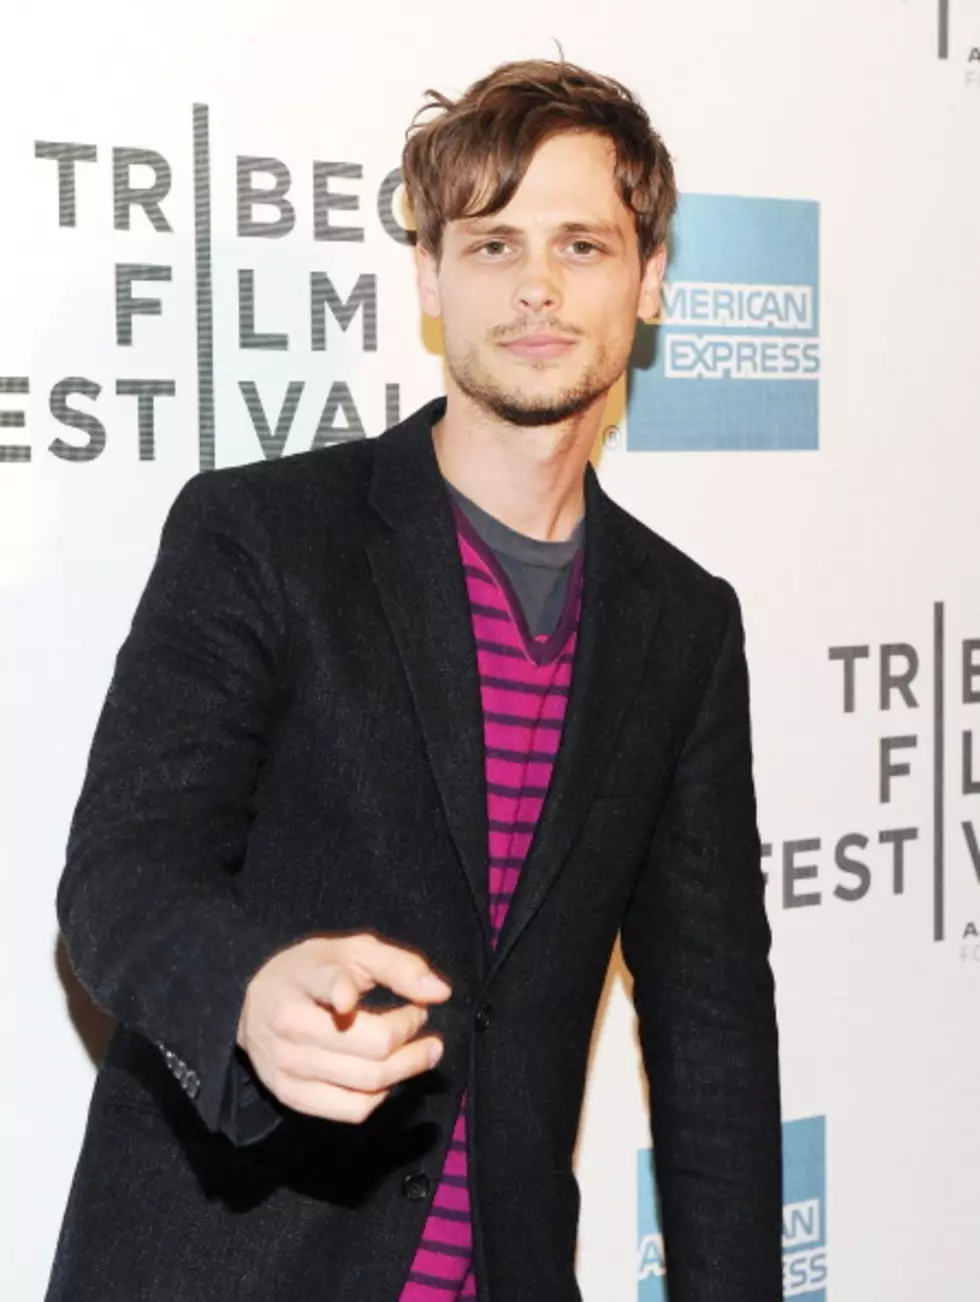 Swoon Over The Hotness Of Matthew Gray Gubler – Wendy’s Hunk Of The Week